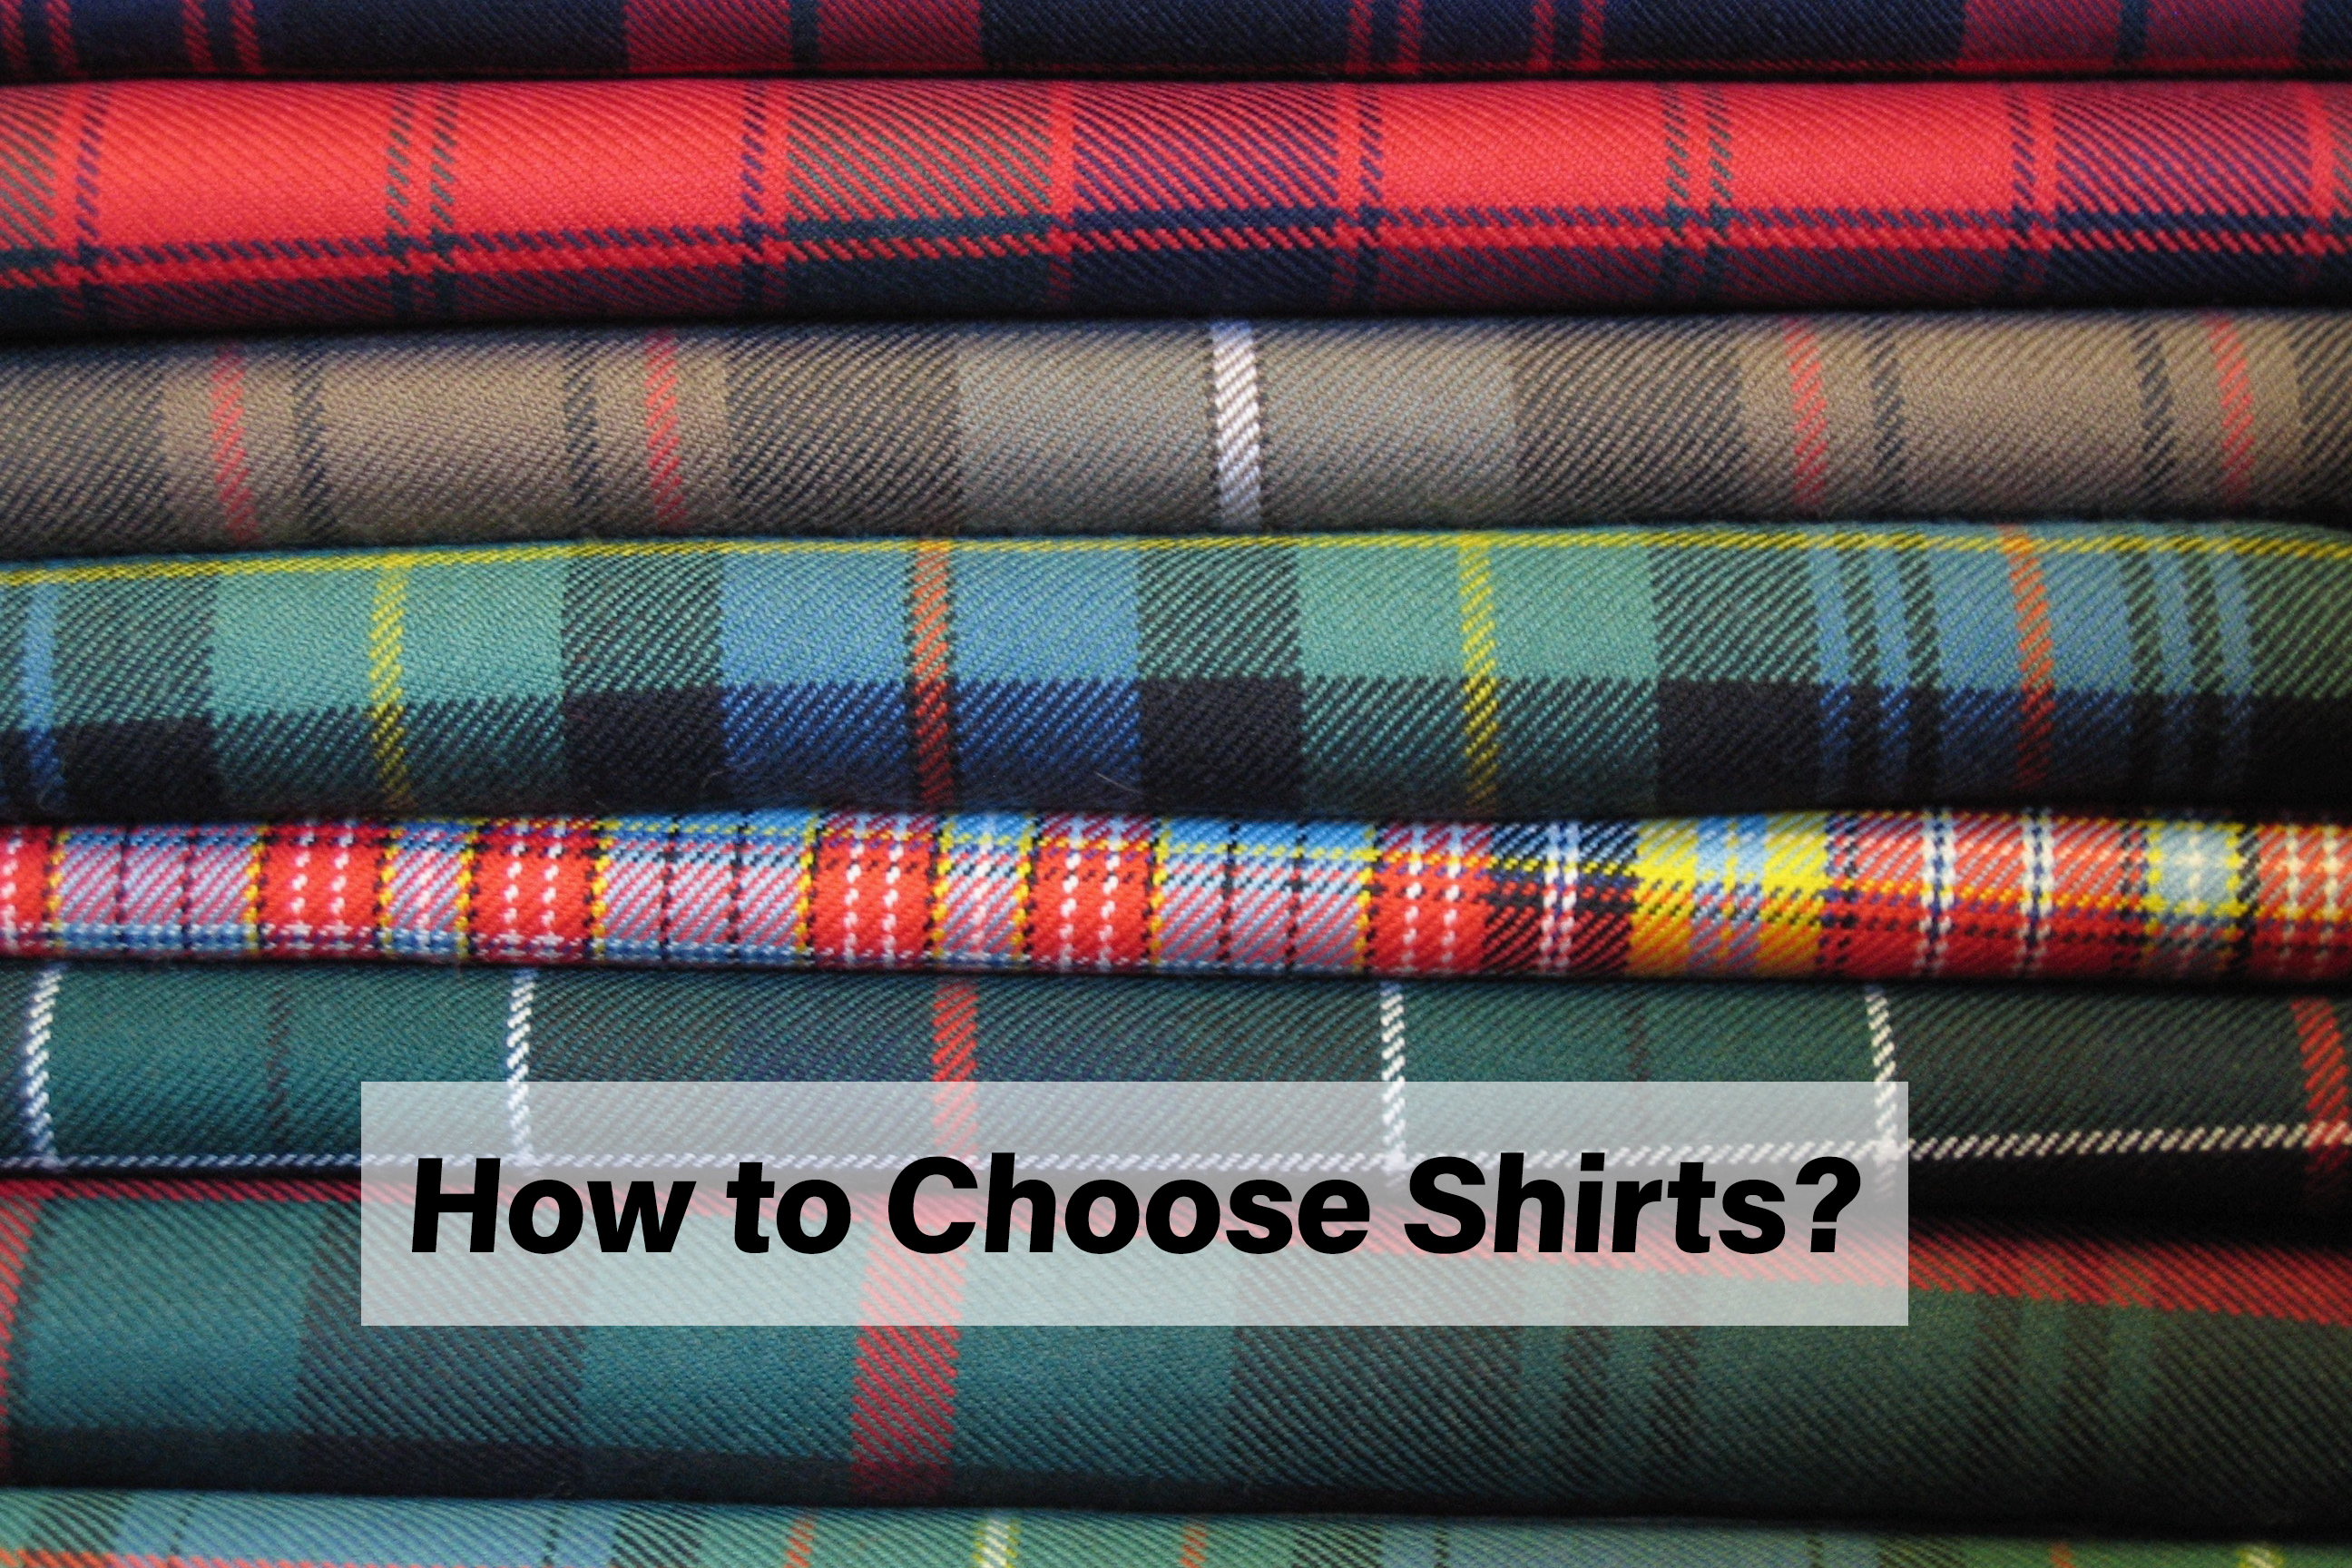 How to Choose Shirts